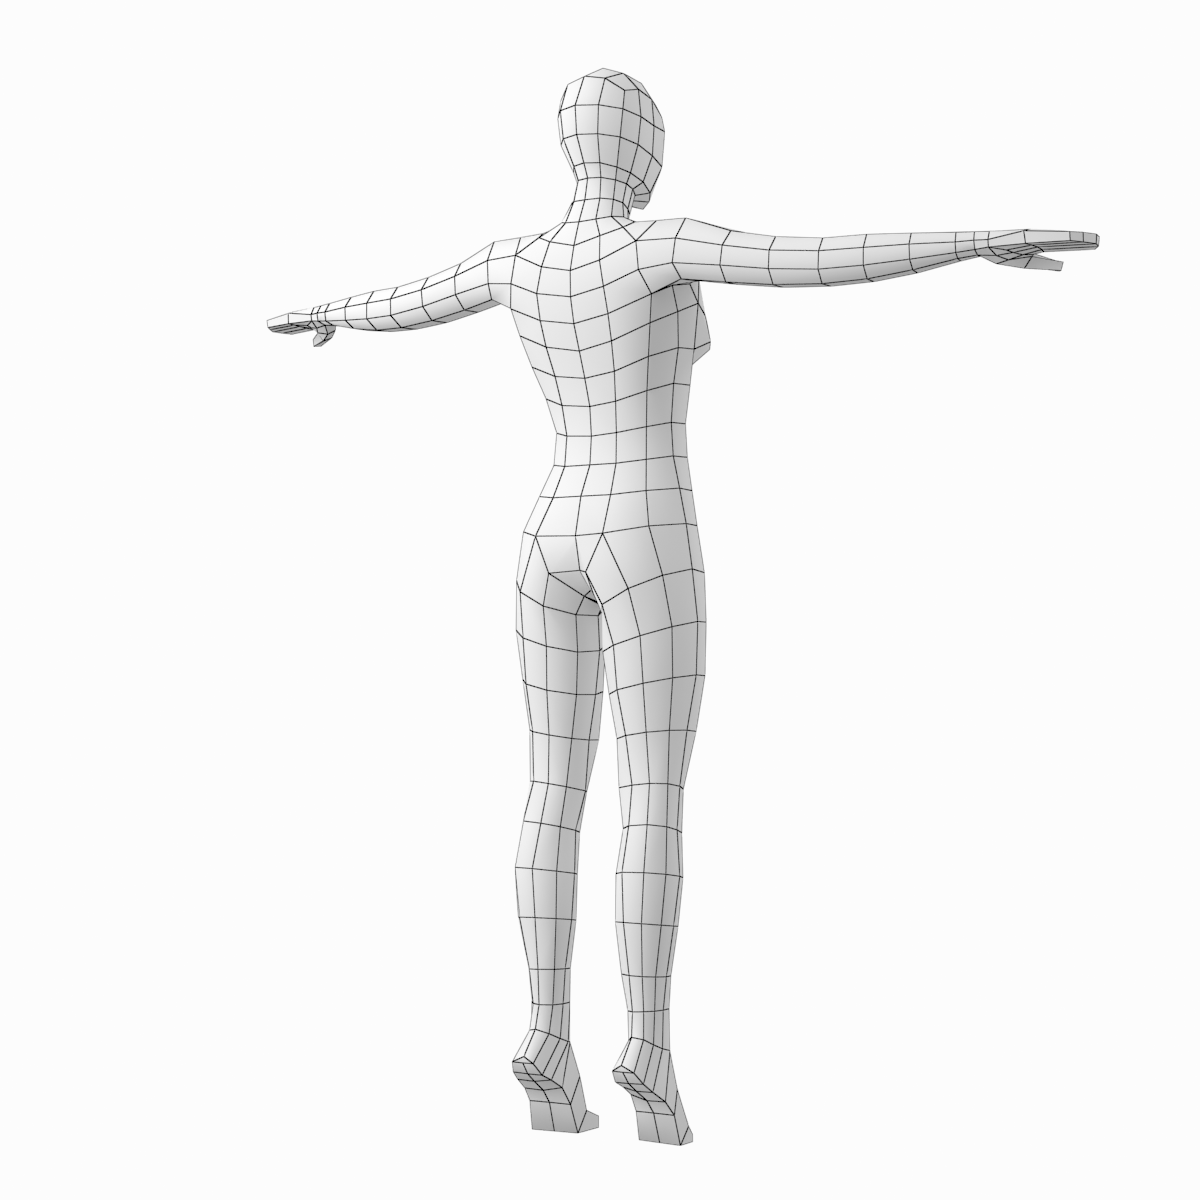 Featured image of post Anime T Pose Template : .gainax pose, fun poses draw, anime animation techniques, anime stances, popular poses, anime male head base, shaft angle anime, famous pose poses templates, anime poses men, anime poses app, anime poses sketches, anime po, female anime poses, manga pose reference, anime.